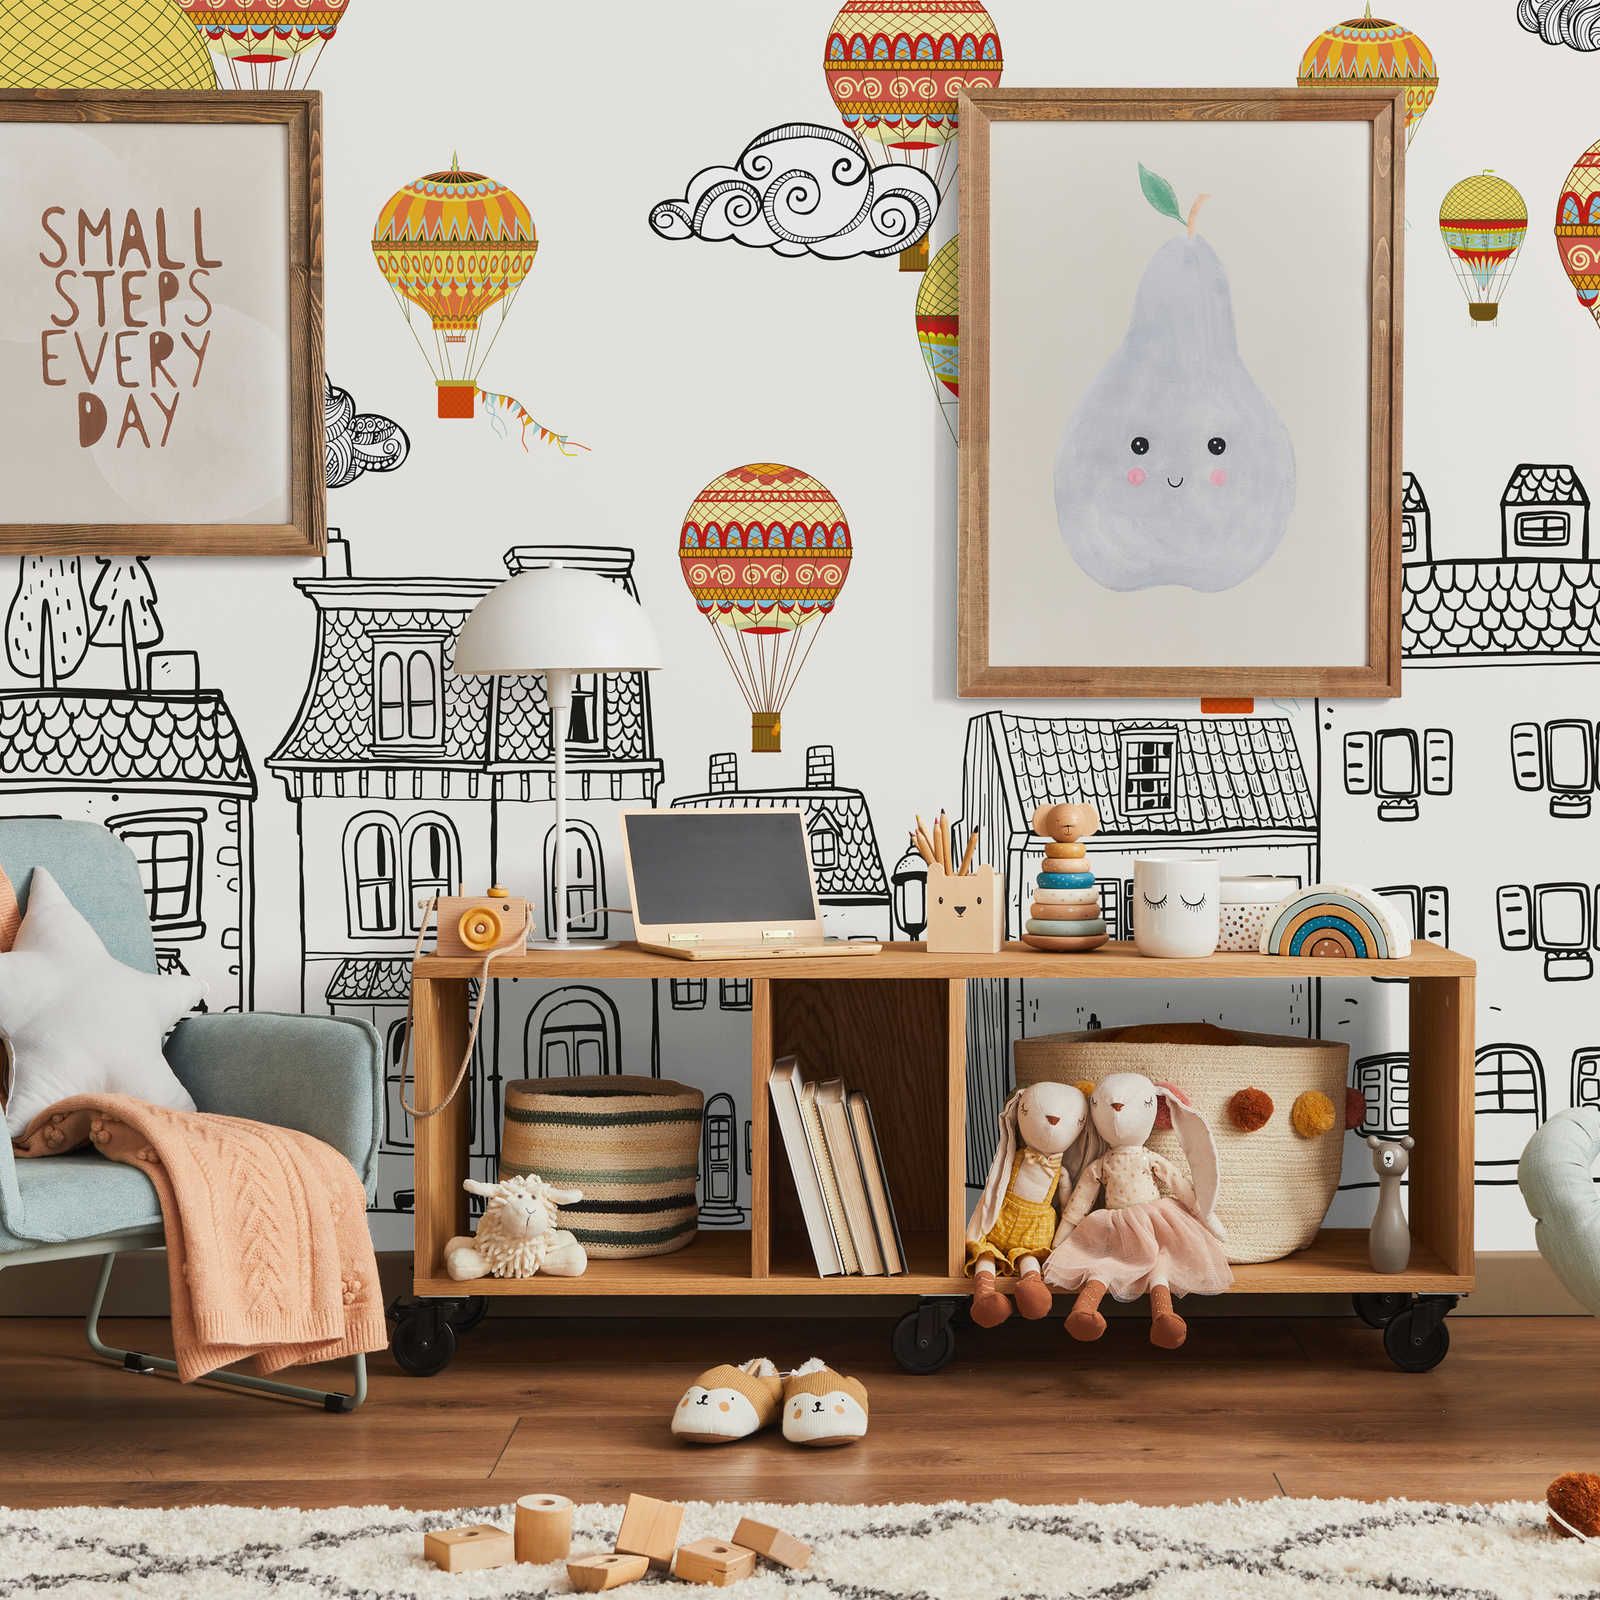 Small Town with Hot Air Balloons Wallpaper - Textured Non-woven
